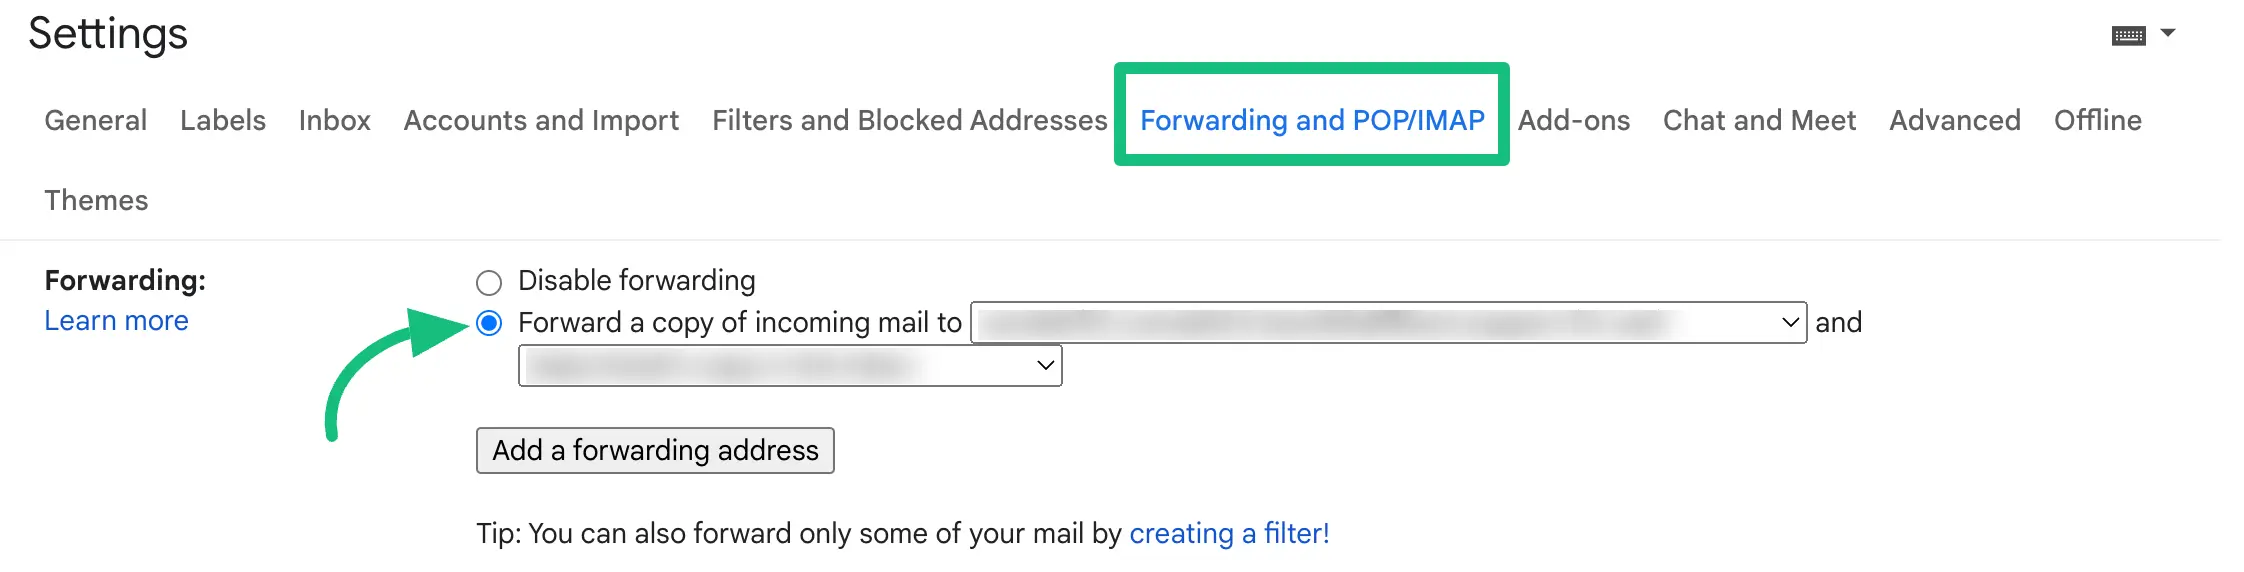 Enable Forwarding a copy of incoming mail to option